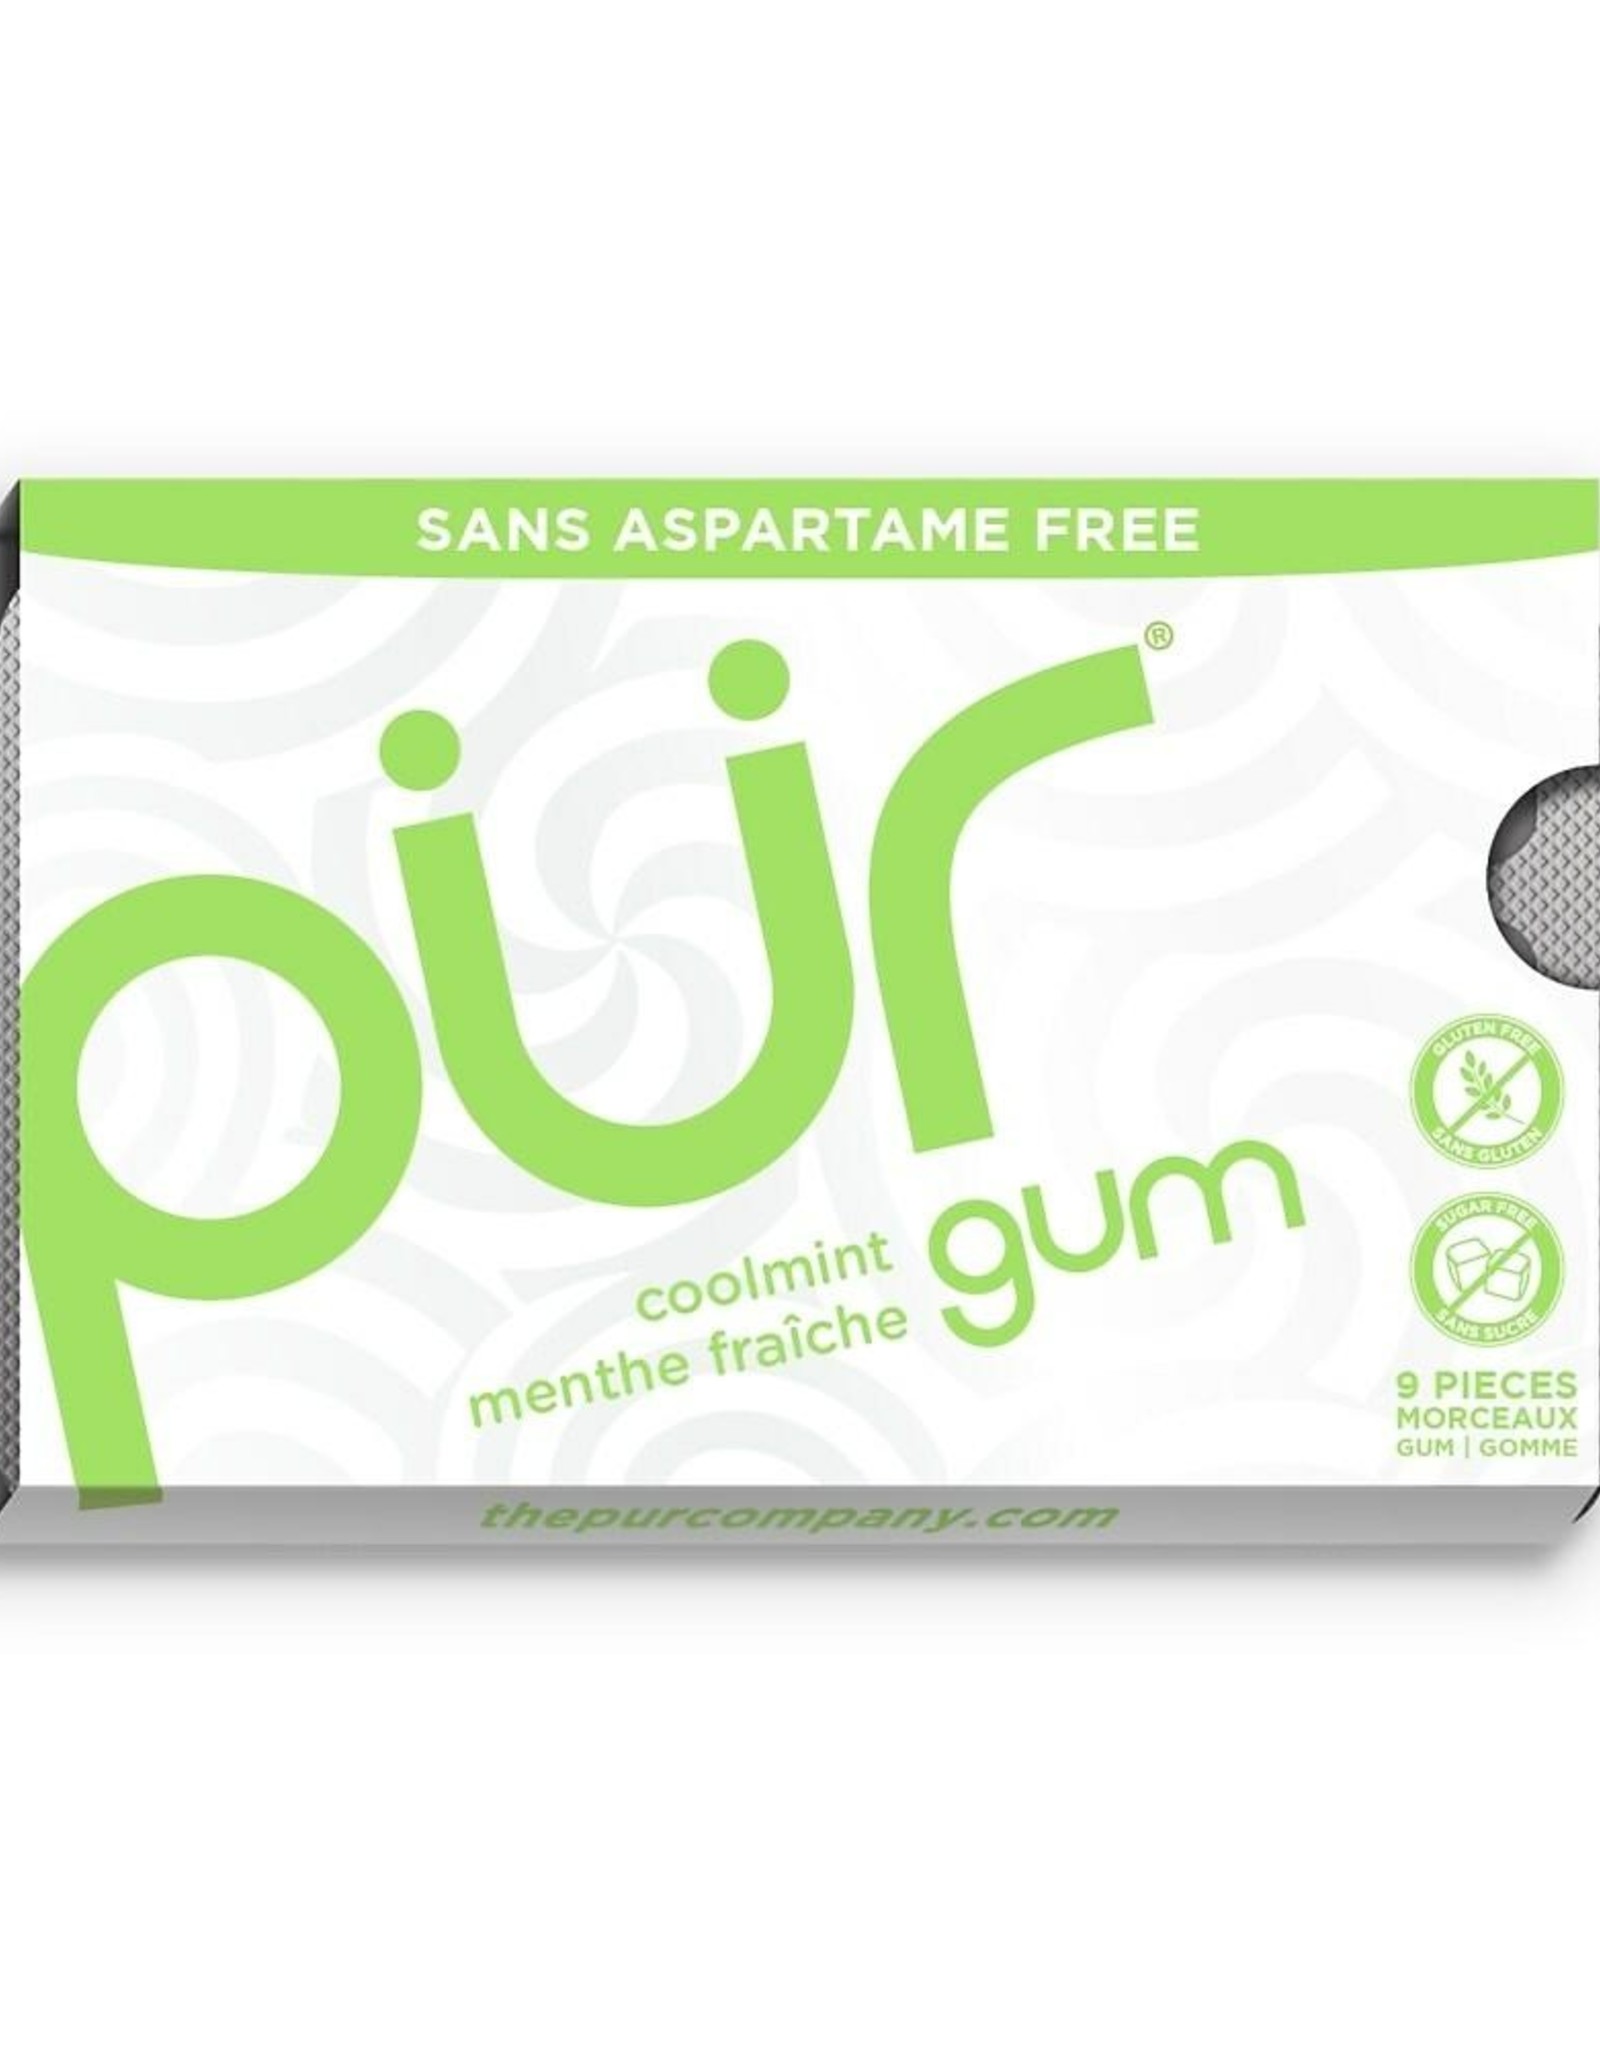 The PUR Comapny Pur Gum Coolmint Blister Pack